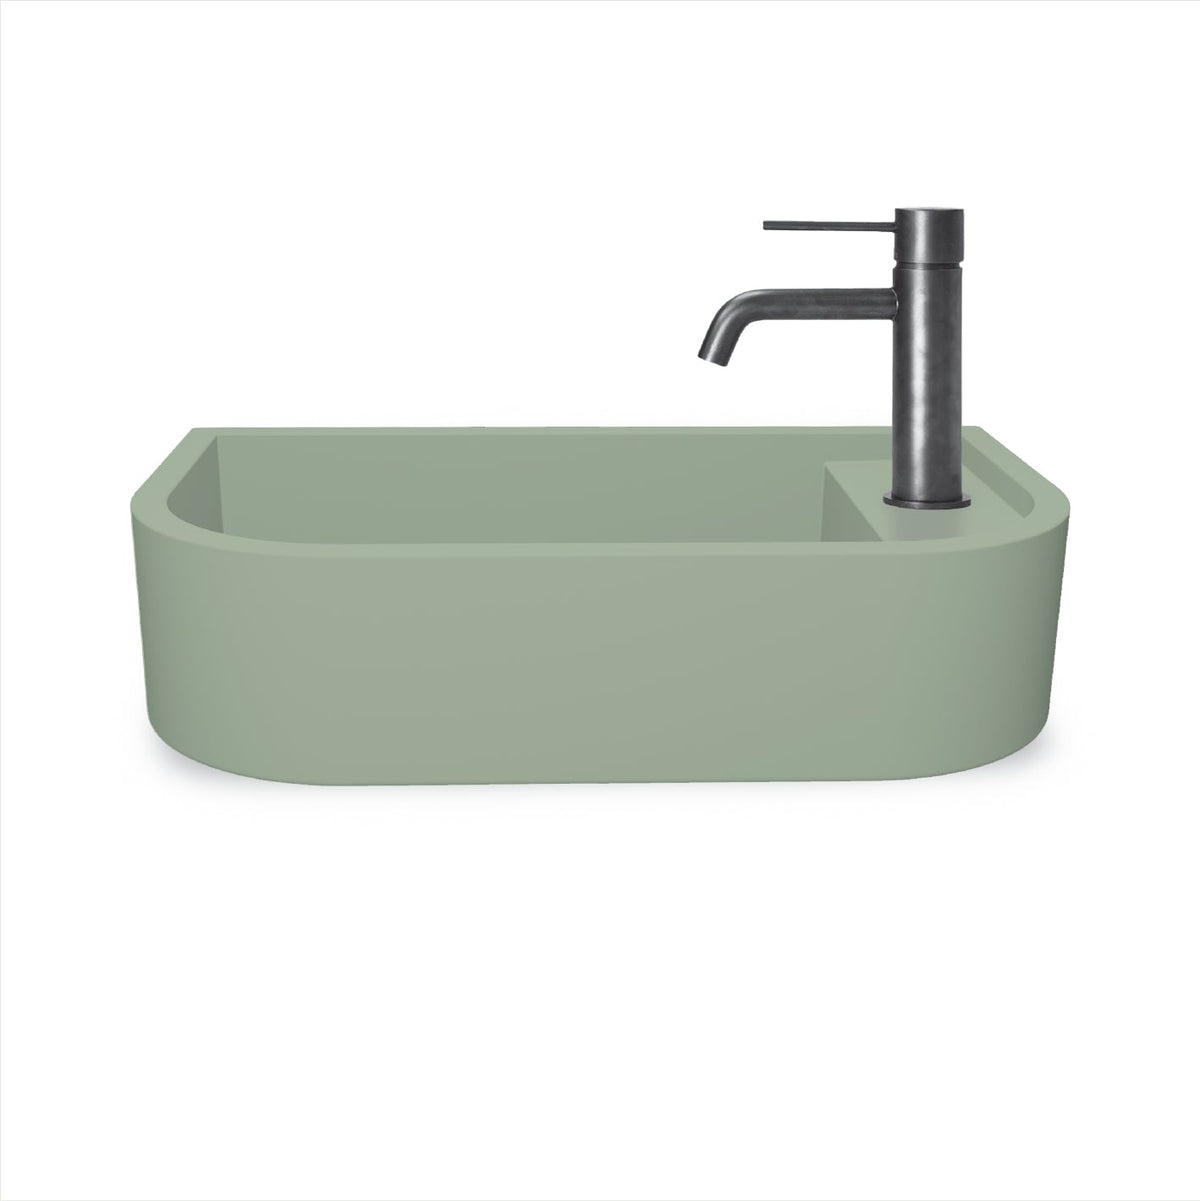 Loop 02 Basin - Overflow - Wall Hung (Mint,Tap Hole,Chrome)